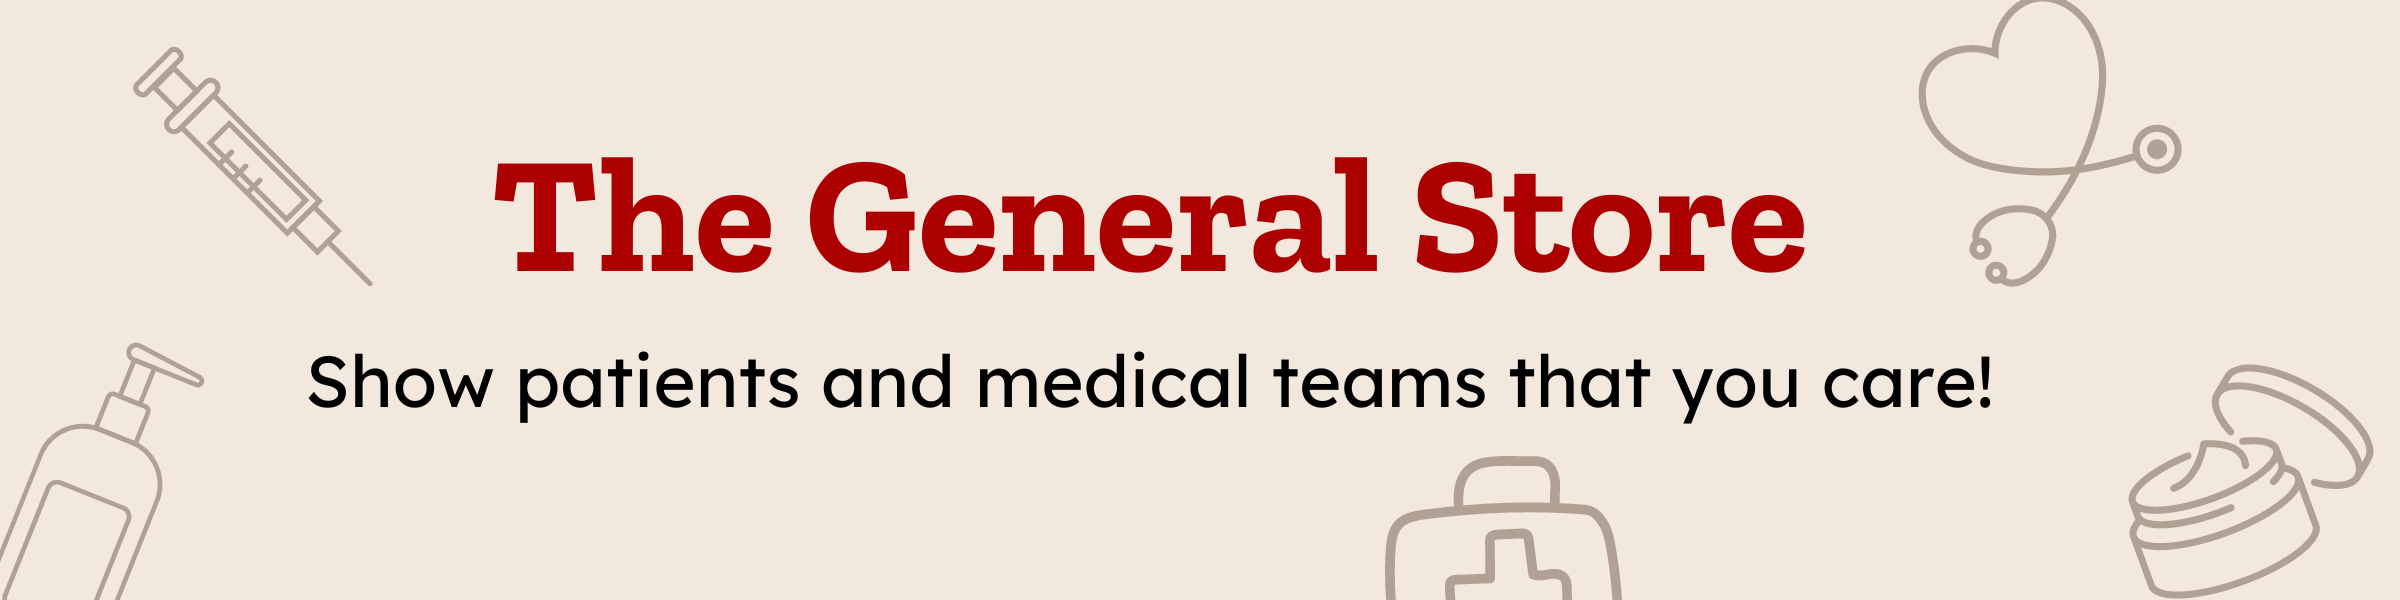 The General Store - Show patients and medical teams that your care!